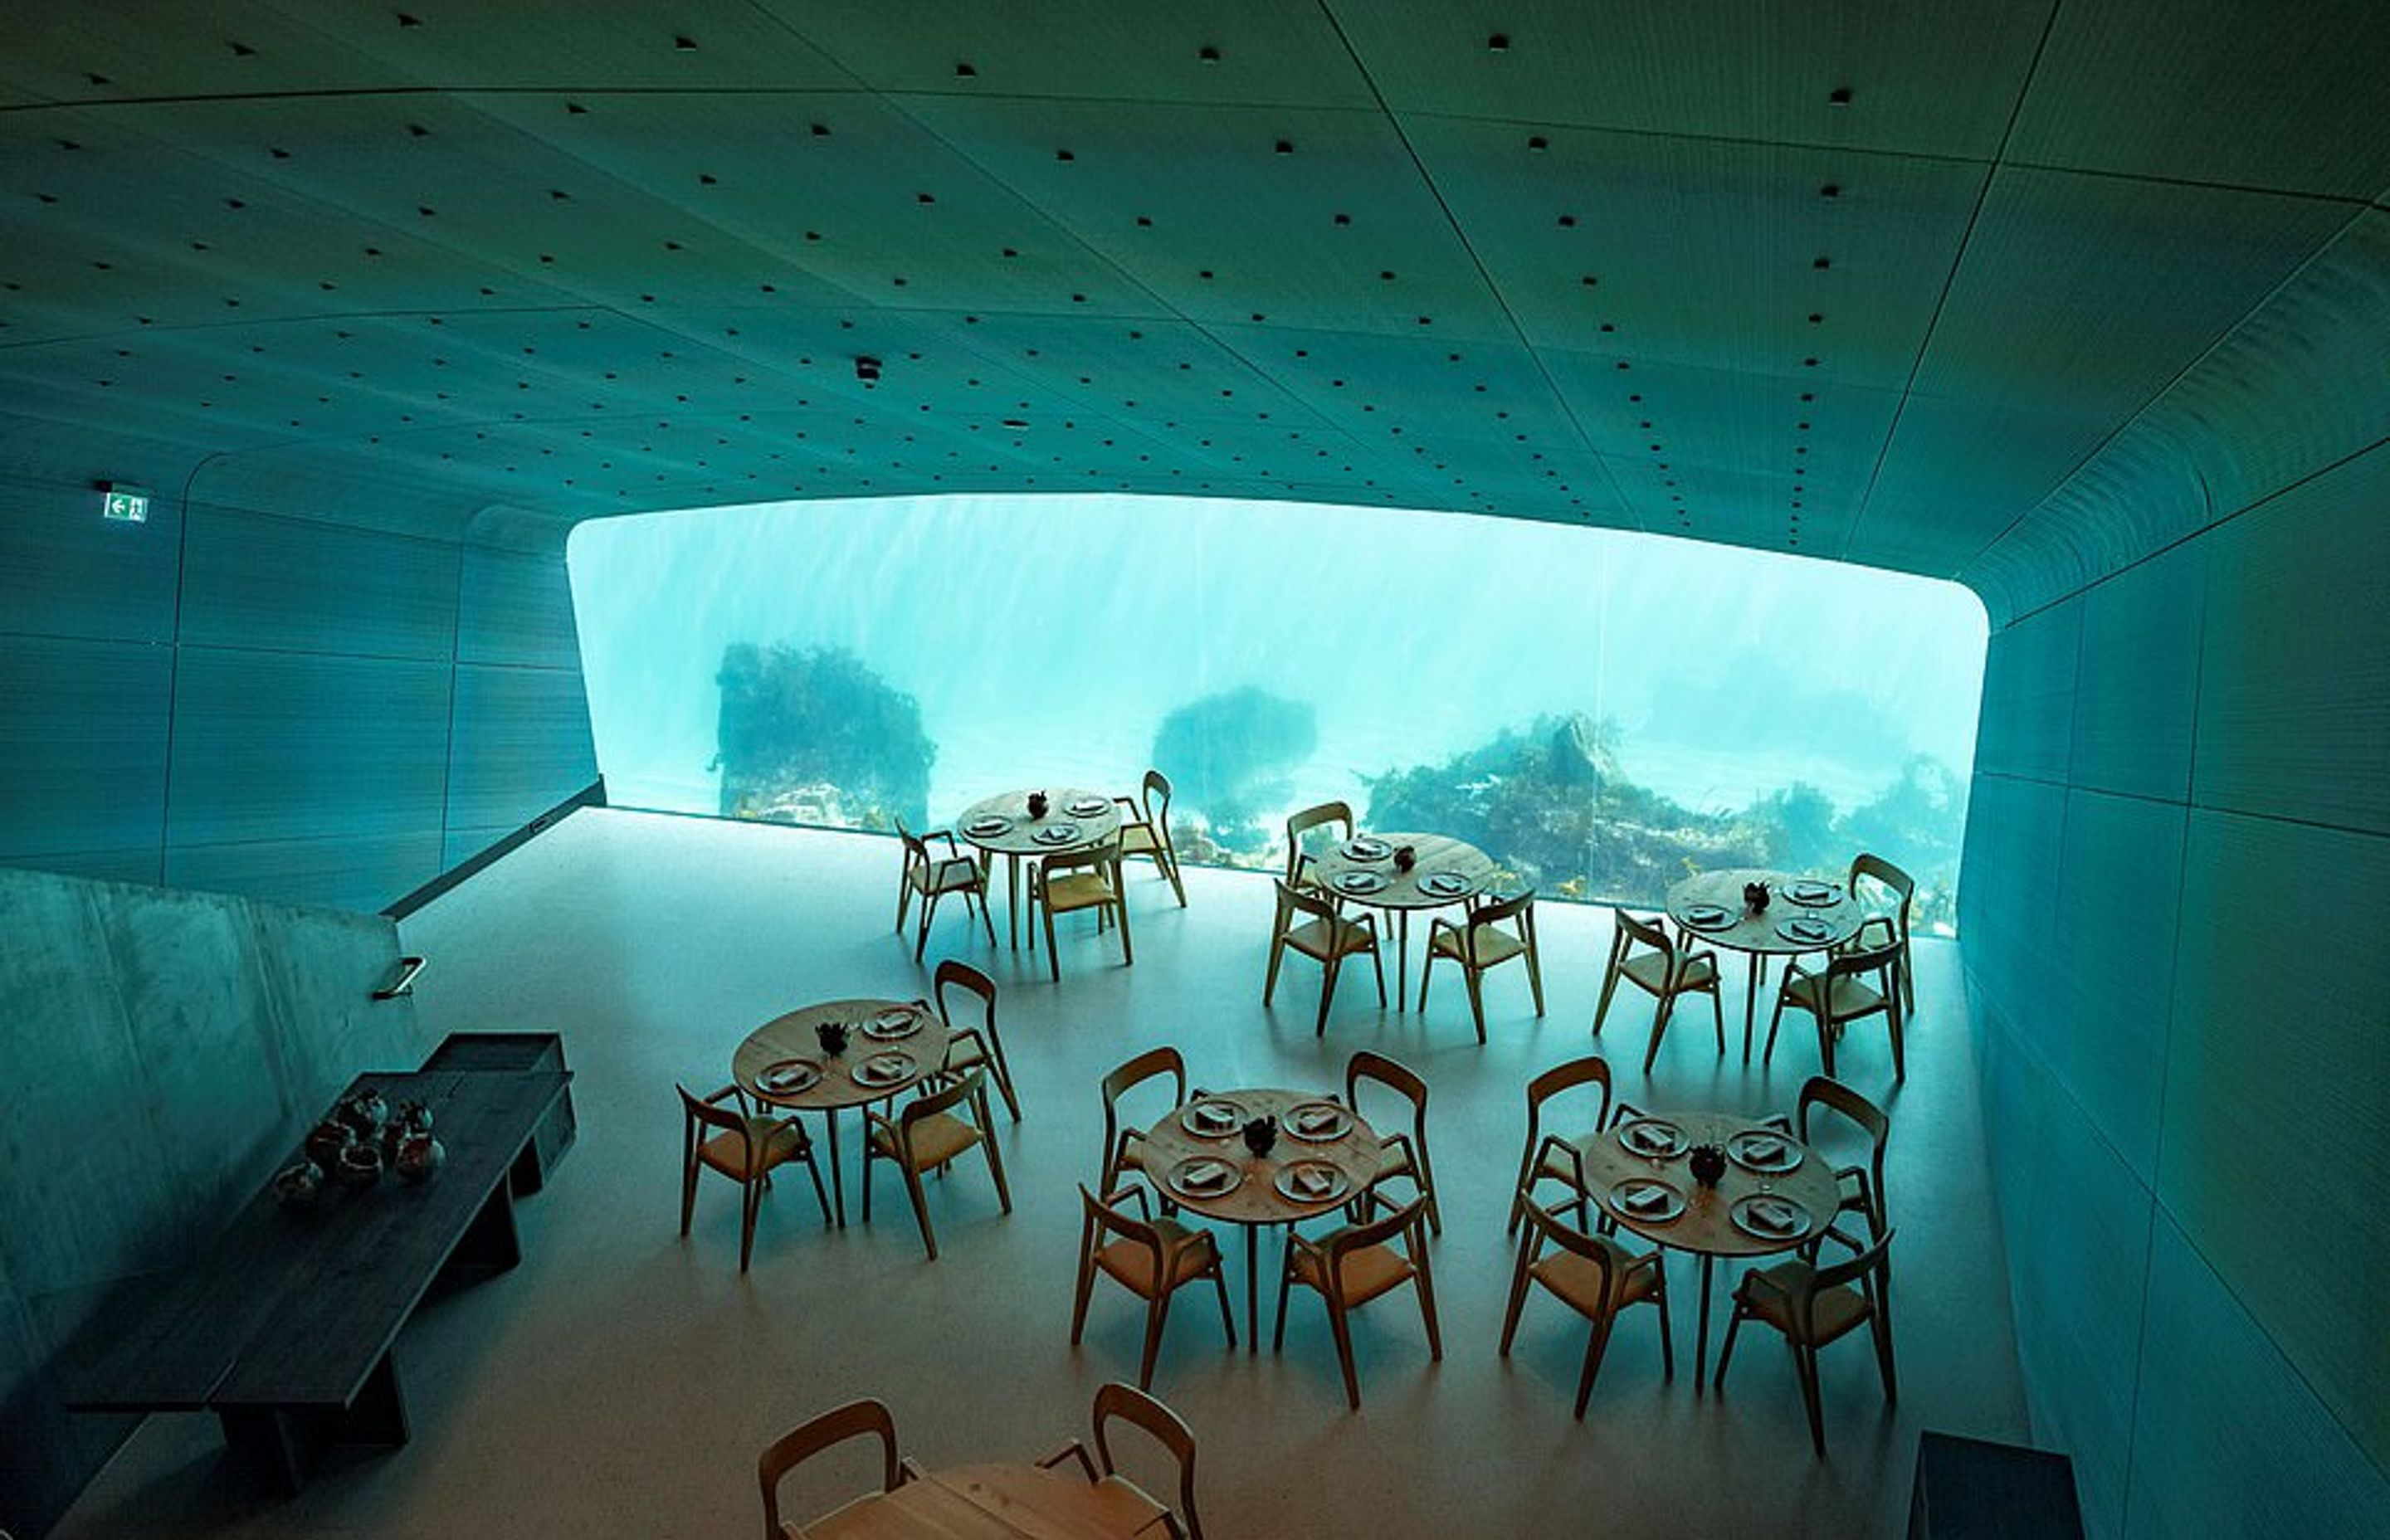 For Europe’s first underwater restaurant, “Under”, a large part of the building is submerged, making fresh air—and available floor space—a very valuable commodity. A compact, energy-efficient Systemair air handling unit was specified.